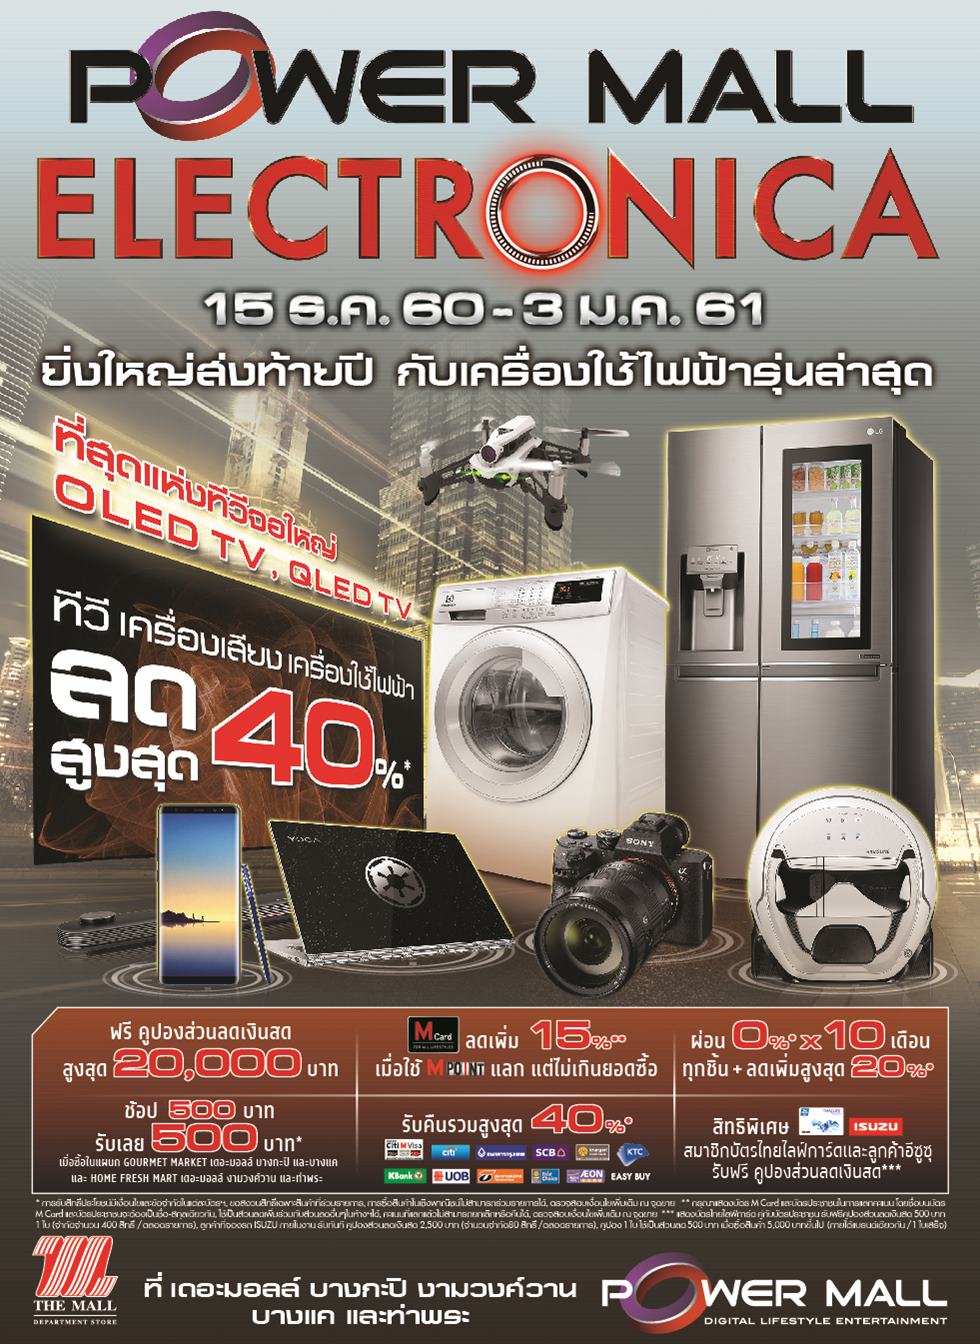 POWER MALL ELECTRONICA 2018